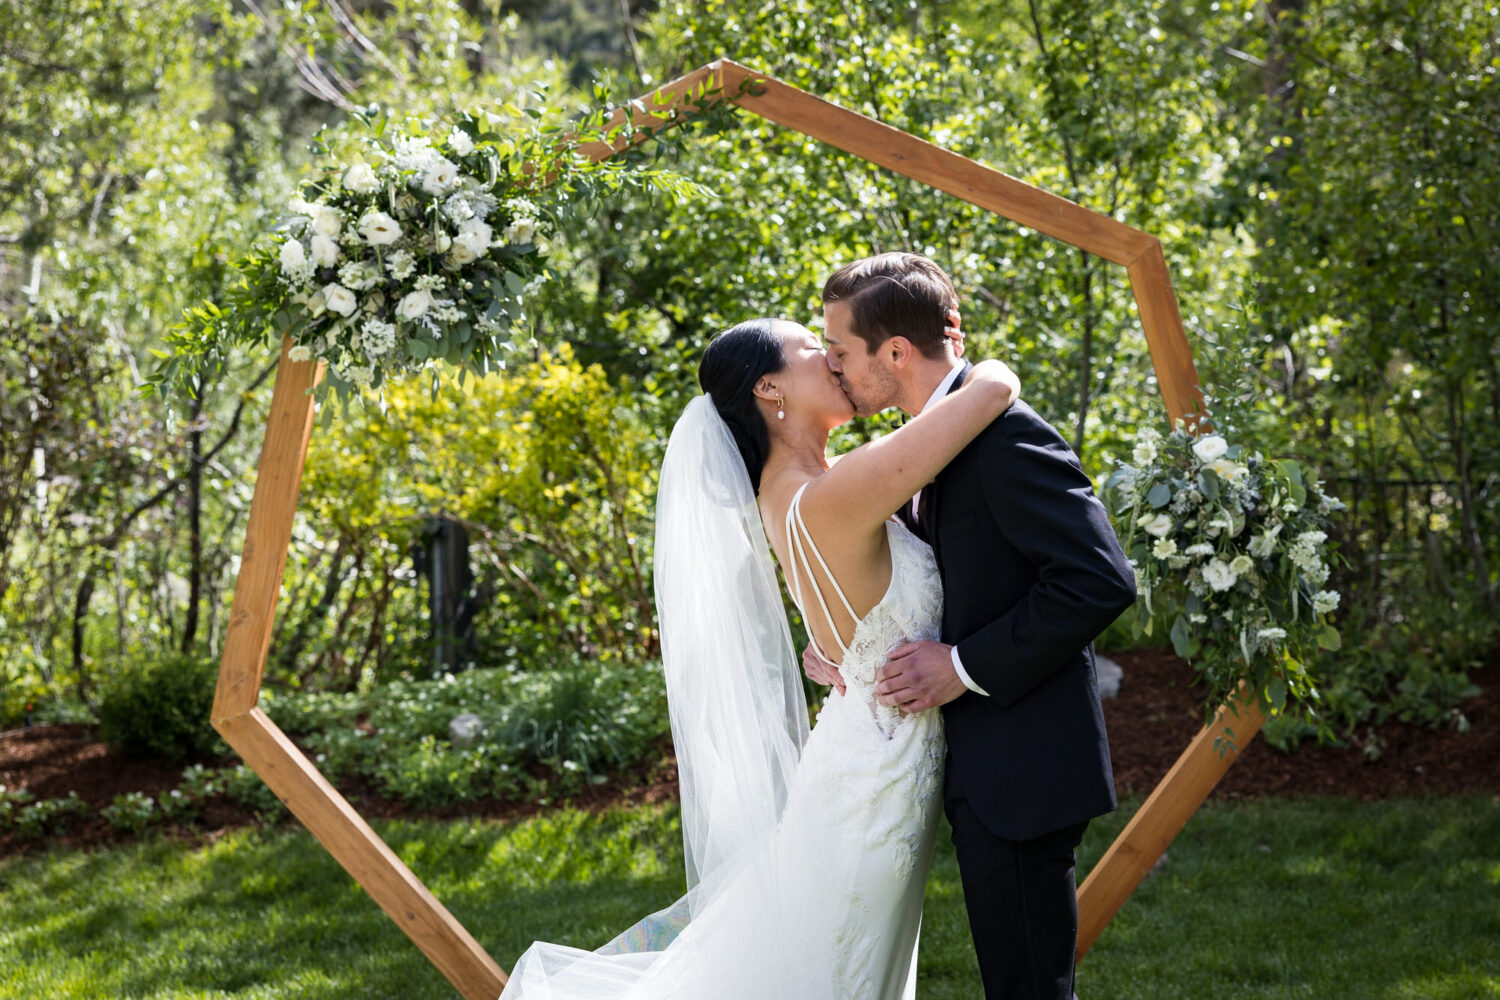 First kiss in front of a hexagon shaped arch at an Olympic Village Events Center wedding.